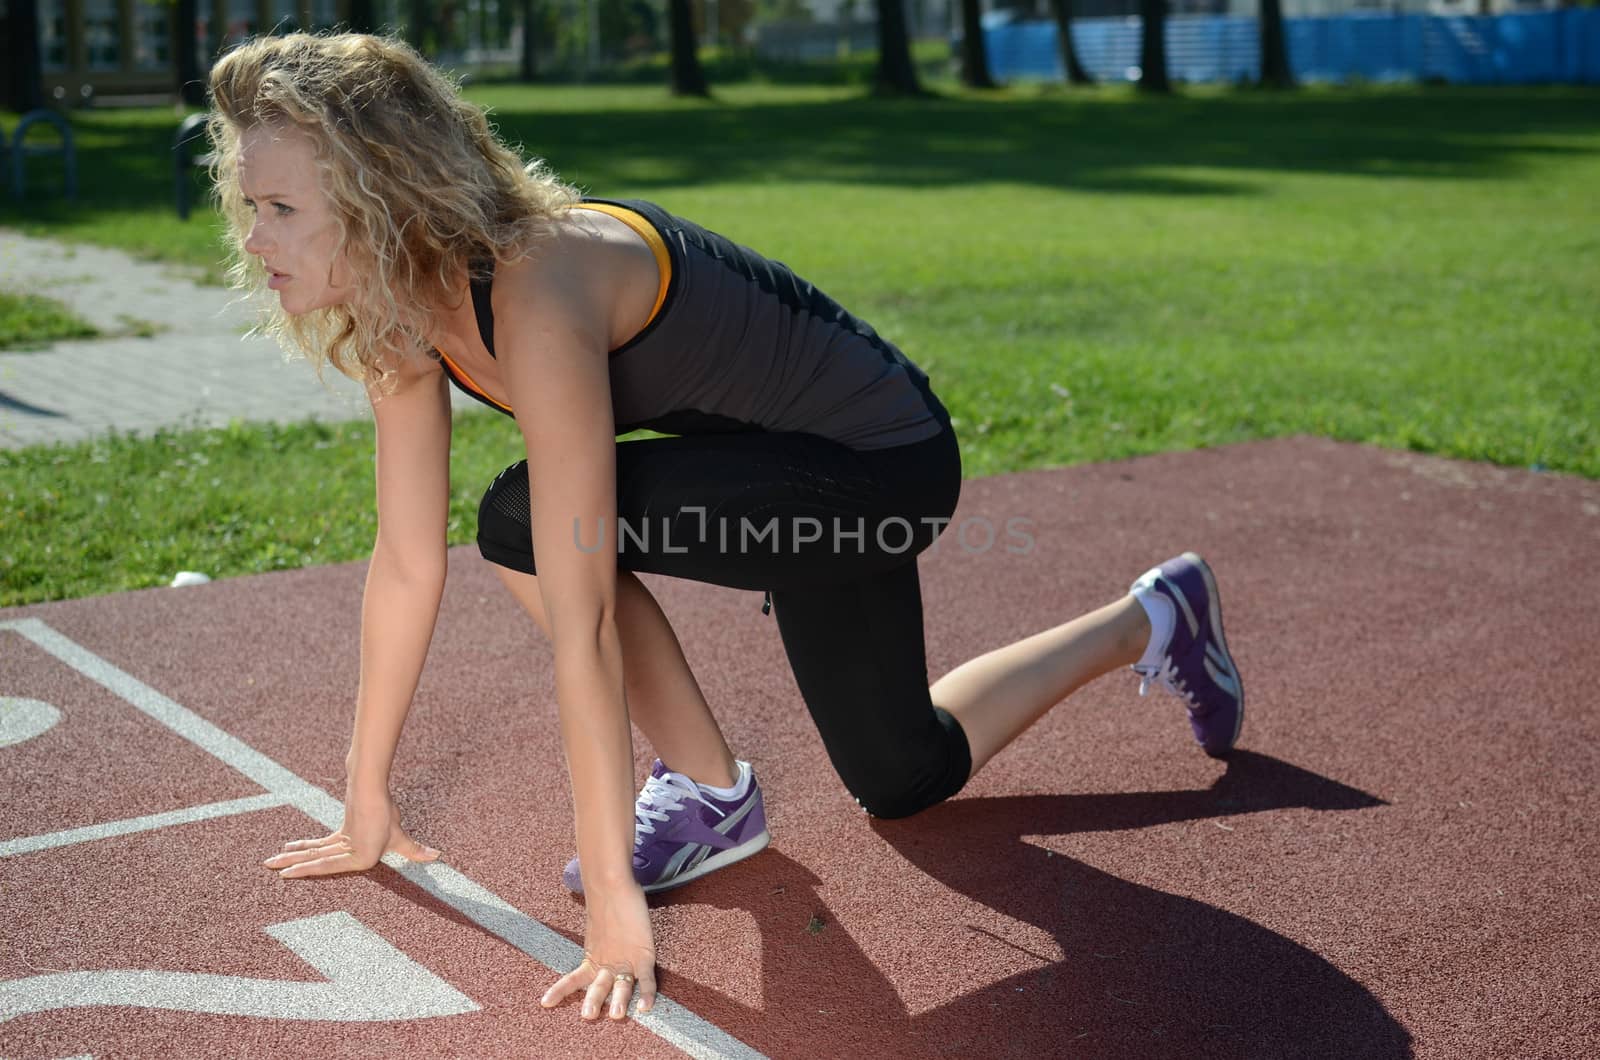 Young female runner prepares for the ran, sets her hands and feet. Blond girl, wearing sport's outfit.